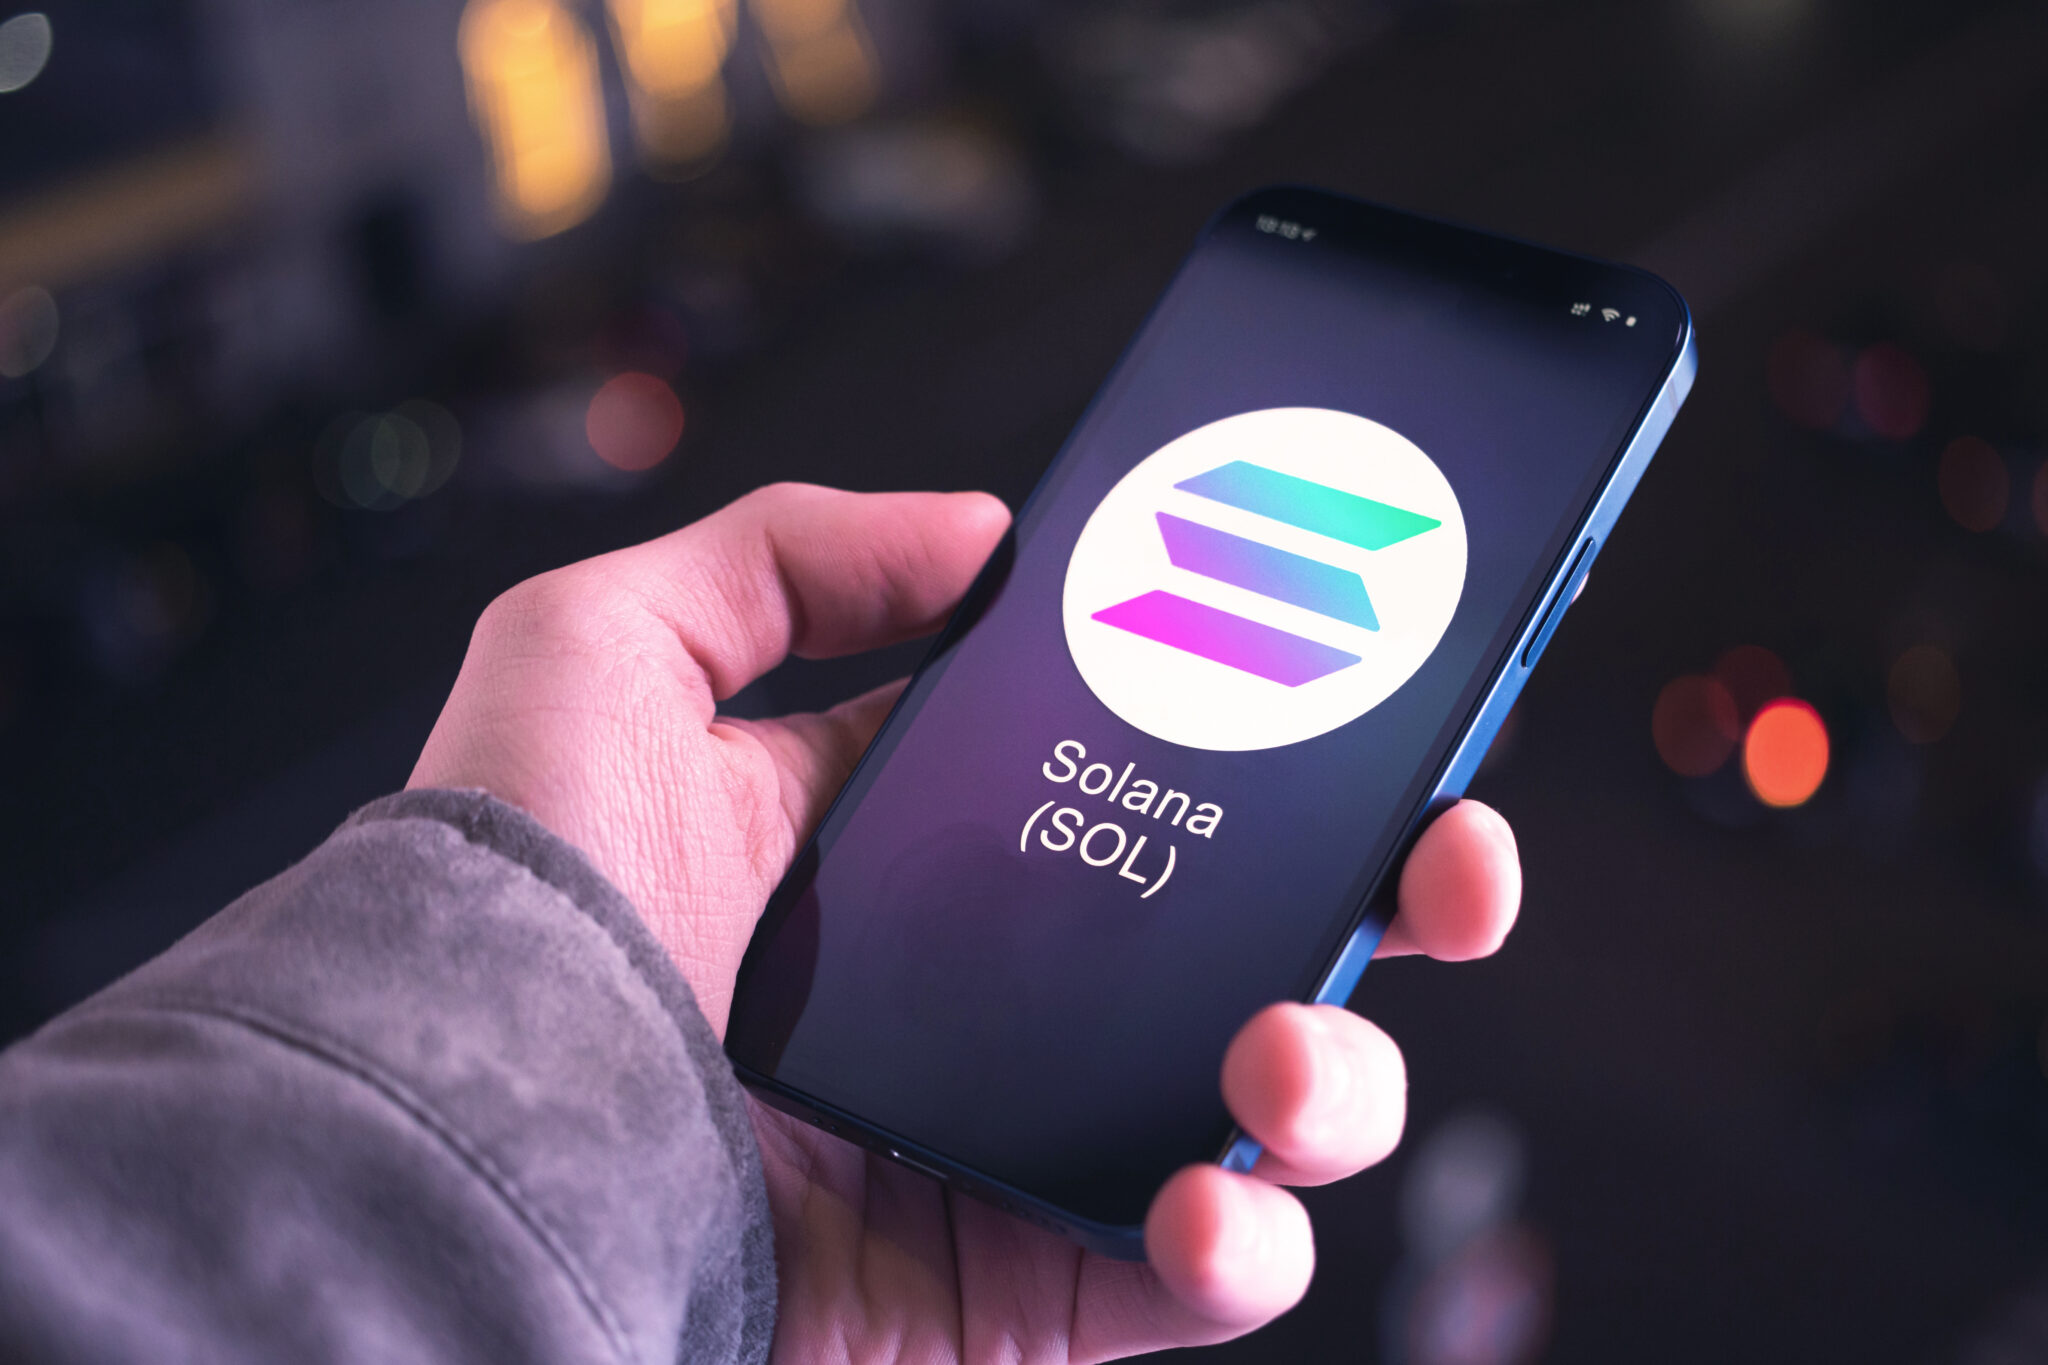 Solana SOL cryptocurrency symbol, logo. Business and financial concept. Hand with smartphone, screen with crypto icon closeup